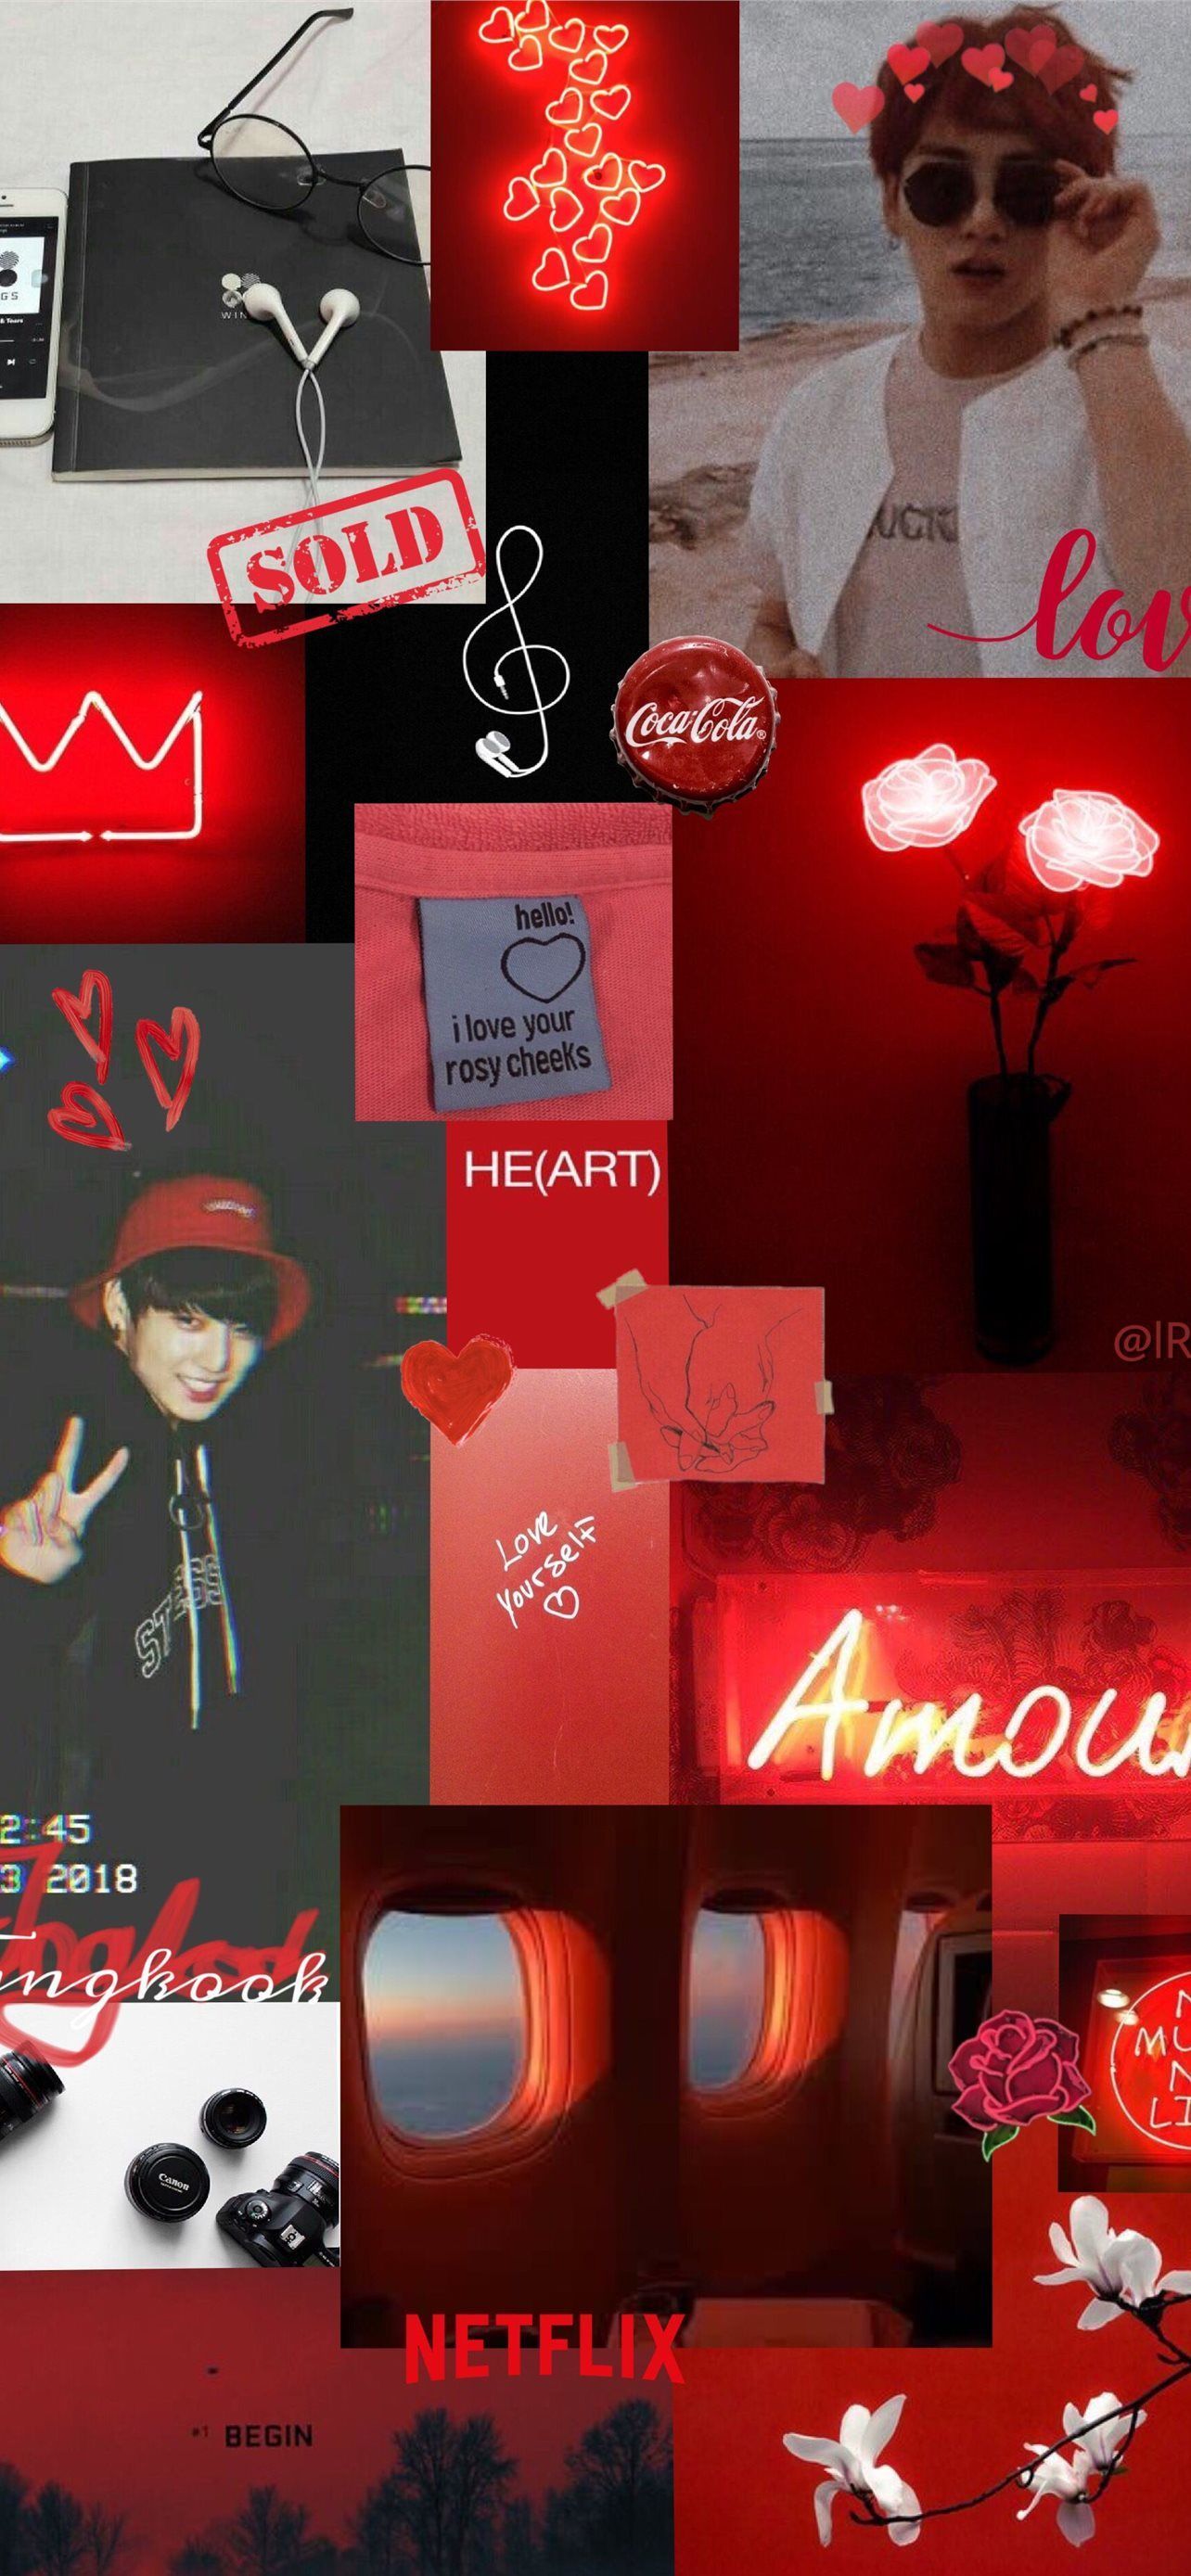 A collage of pictures with red backgrounds - Red, iPhone red, neon red, dark red, Netflix